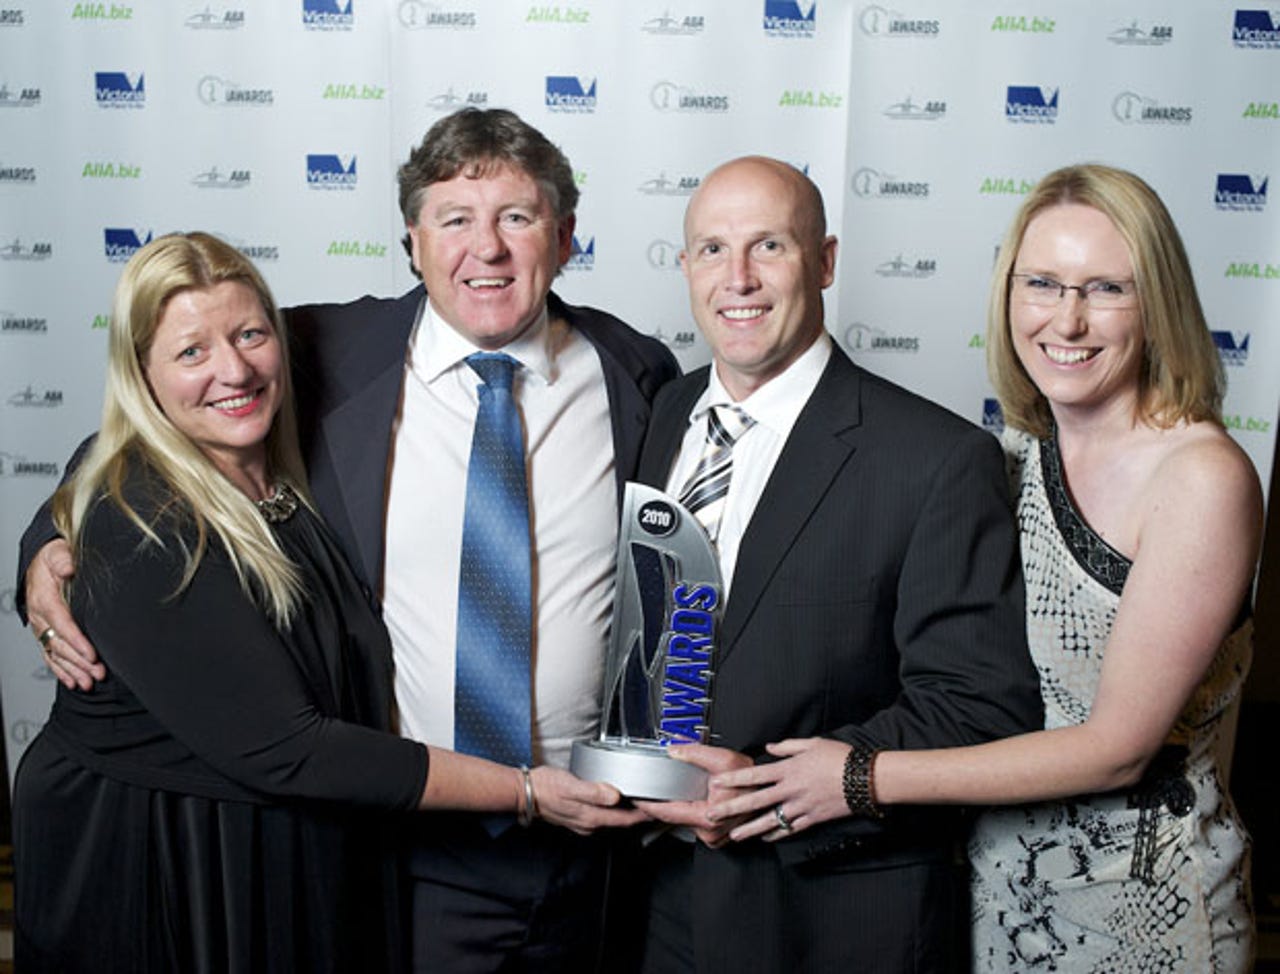 iawards-winners-are-grinners-photos14.jpg